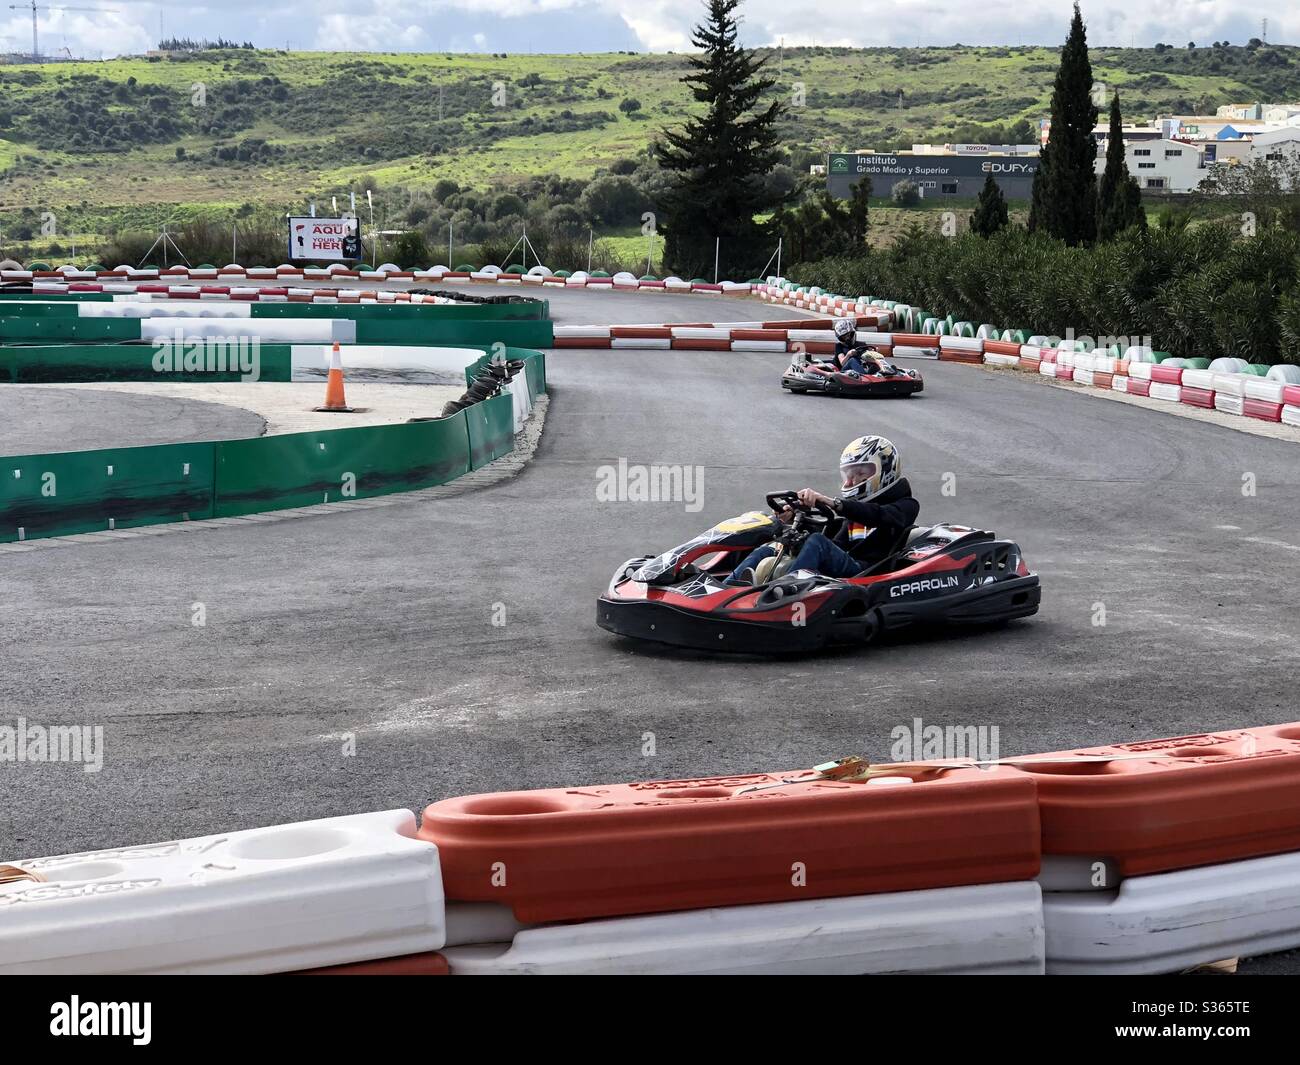 Family day out at the Go Kart track Stock Photo - Alamy